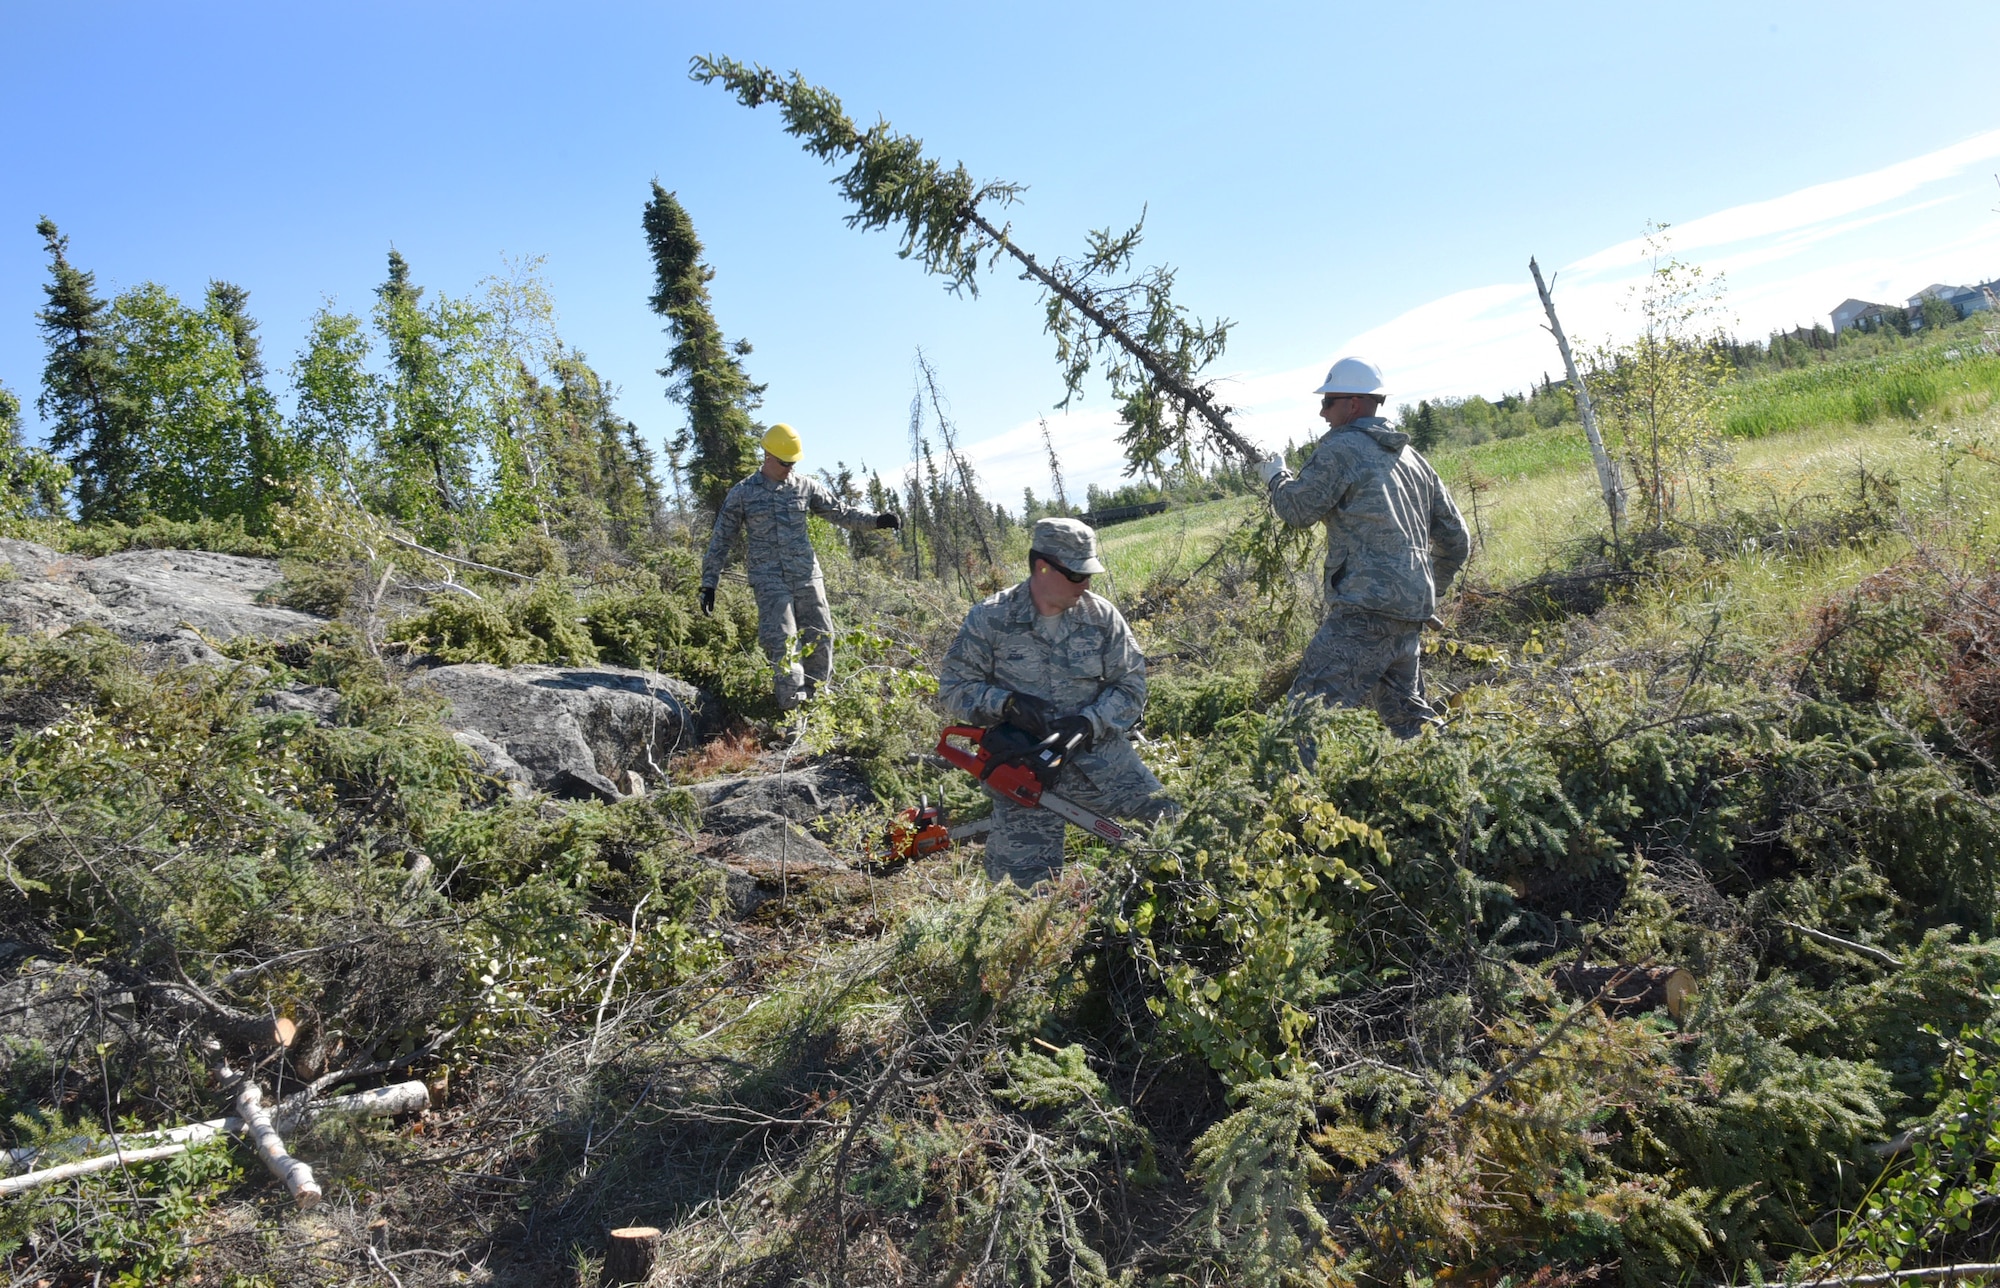 Oregon Airmen from the 142nd Fighter Wing Civil Engineer Squadron (CES) cut and clear a pathway to connect the trail around Niven Lake at Yellowknife, Northwest Territories, Canada, July 18, 2017. The CES members are spending two-weeks in Canada working on a variety of projects during their Deployment for Training (DFT). (U.S. Air National Guard photo/Master Sgt. John Hughel, 142nd Fighter Wing Public Affairs)